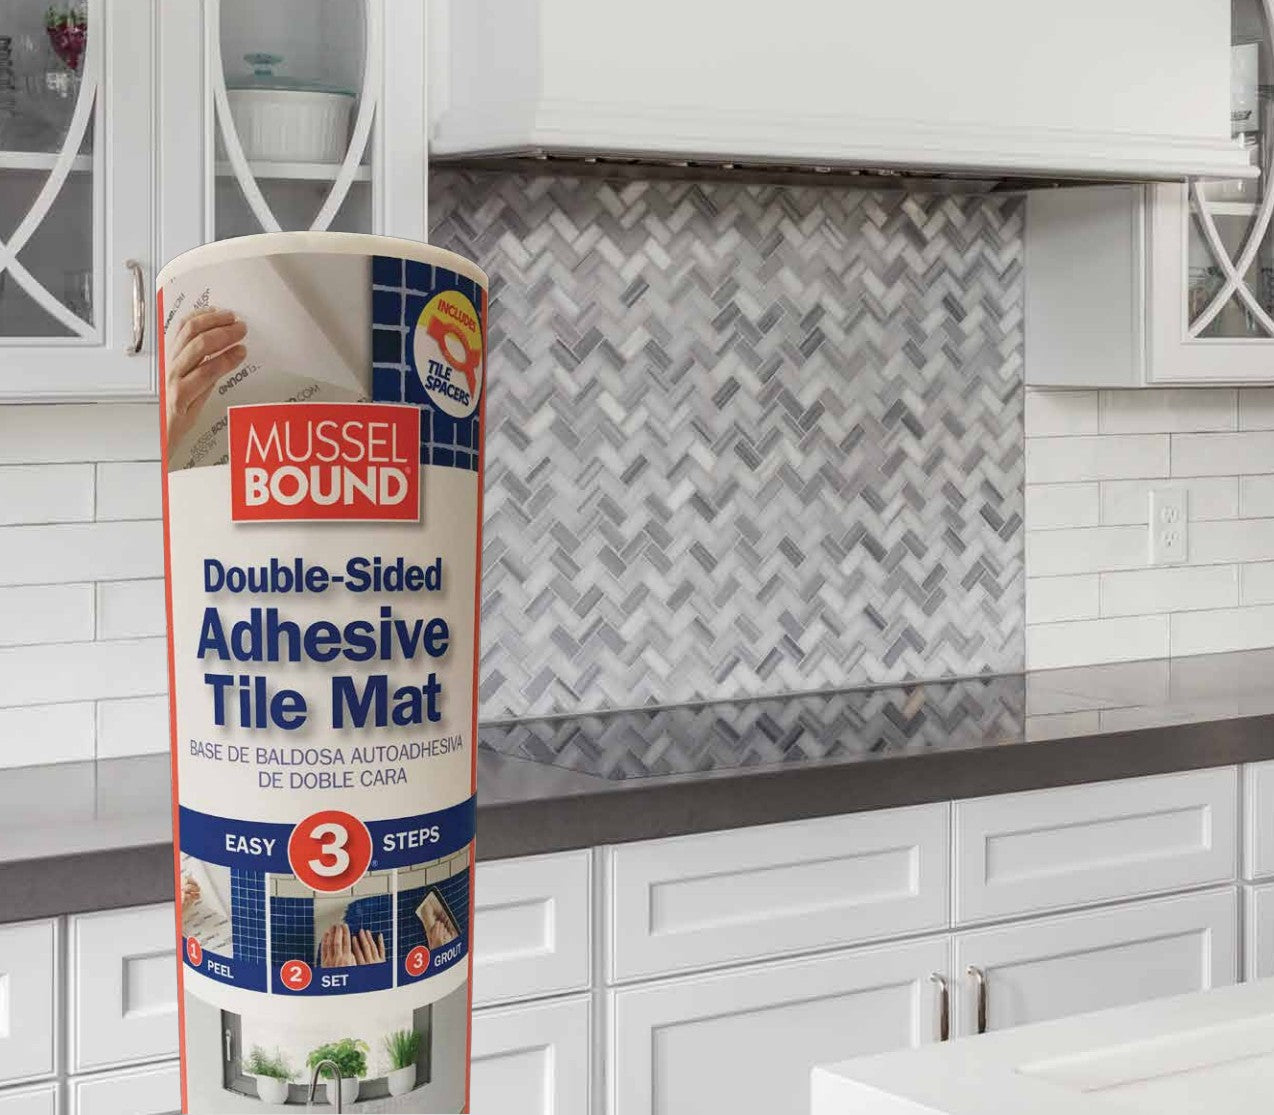 MusselBound on Instagram: Even if you have never tiled a thing in your  life, MusselBound will help you DIY your own beautiful backsplash. Includes  spacers to make the tiles uniformly spaced. MusselBound.com #